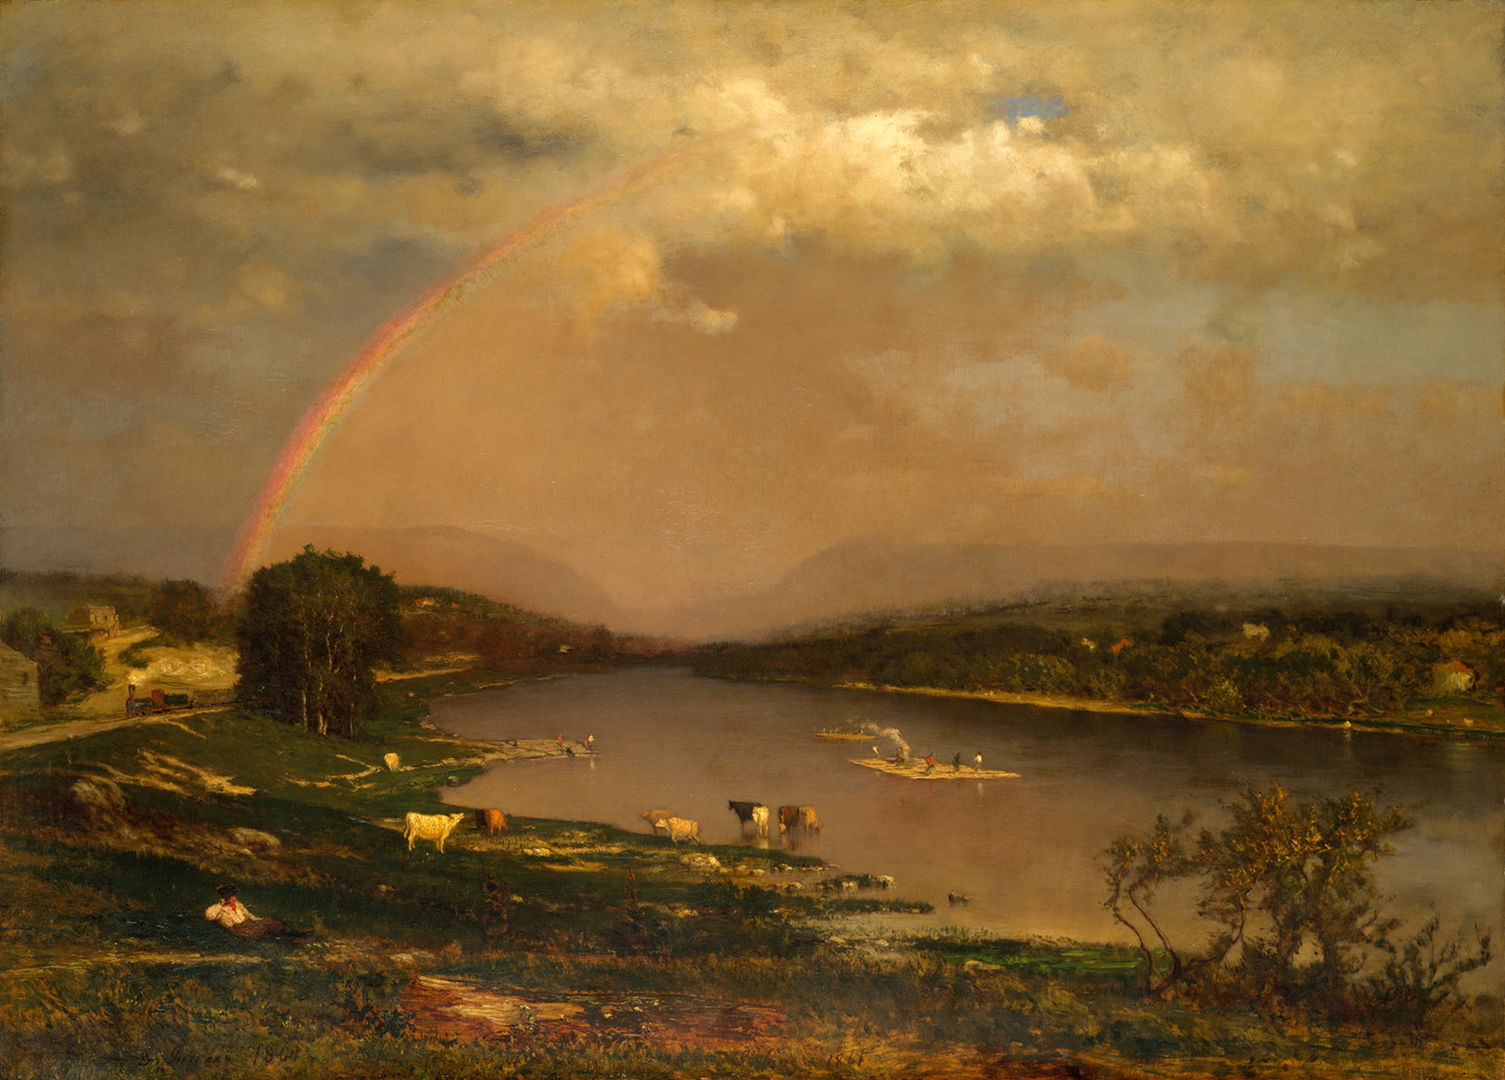 A painting of a rainbow stretching across a river, with a yellow haze